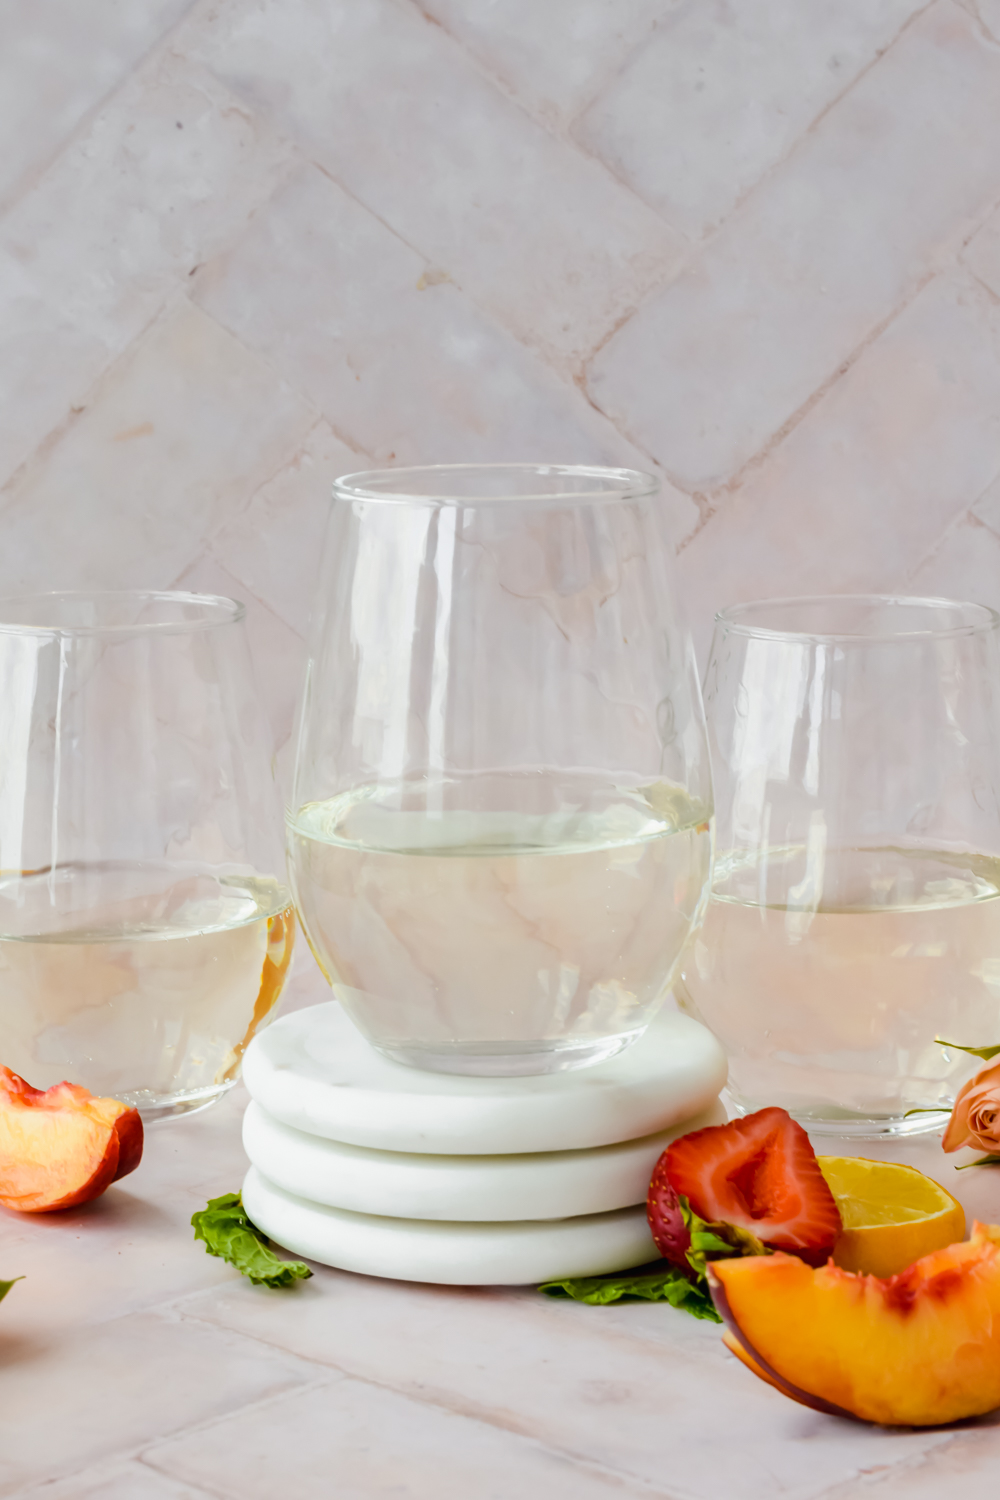 three wine glasses half full of white wine with strawberry and peach slices surrounding on stone white background.